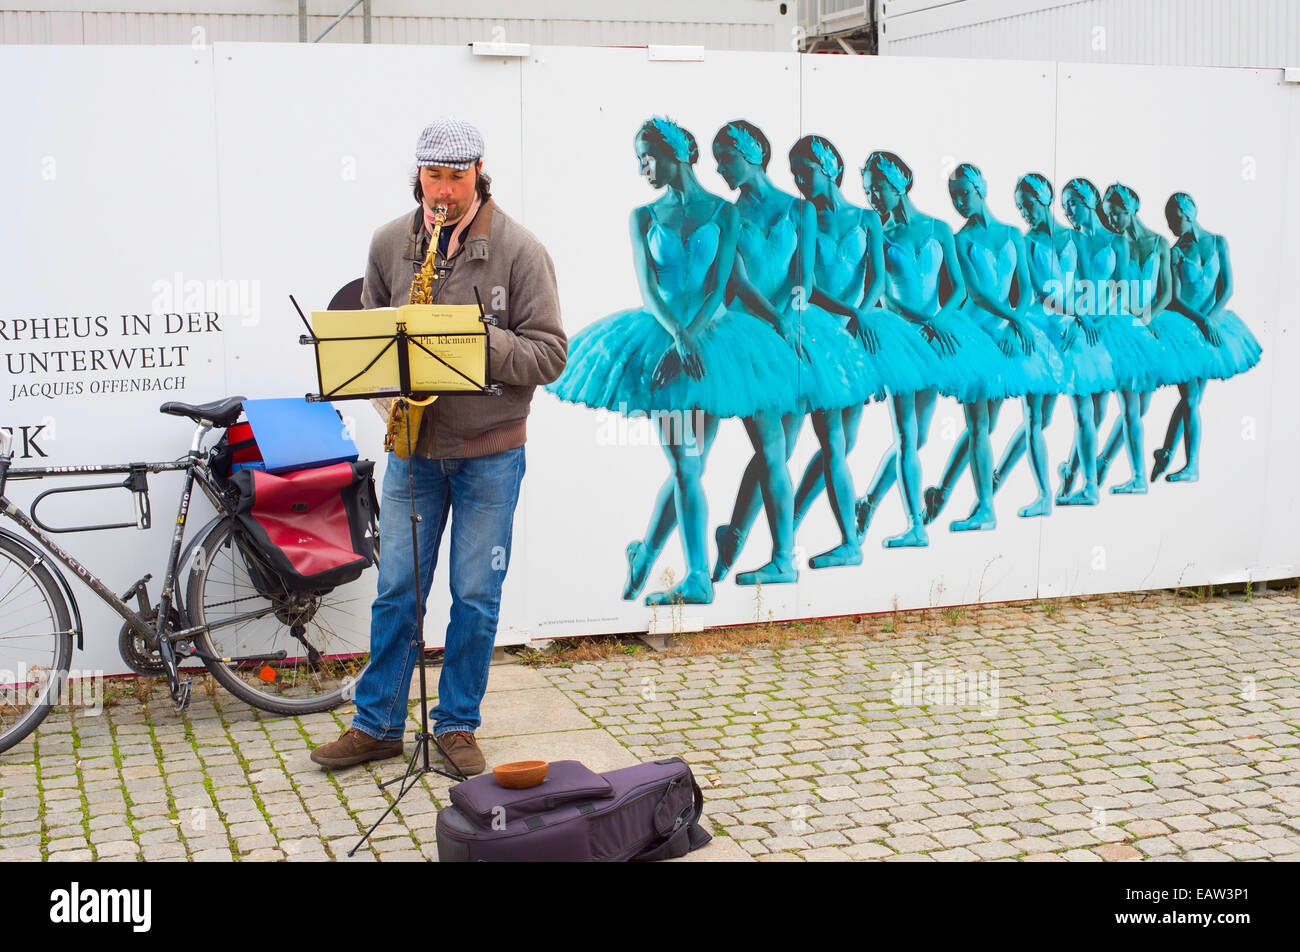 Unedentified musician playing music on the Berlin street. Stock Photo